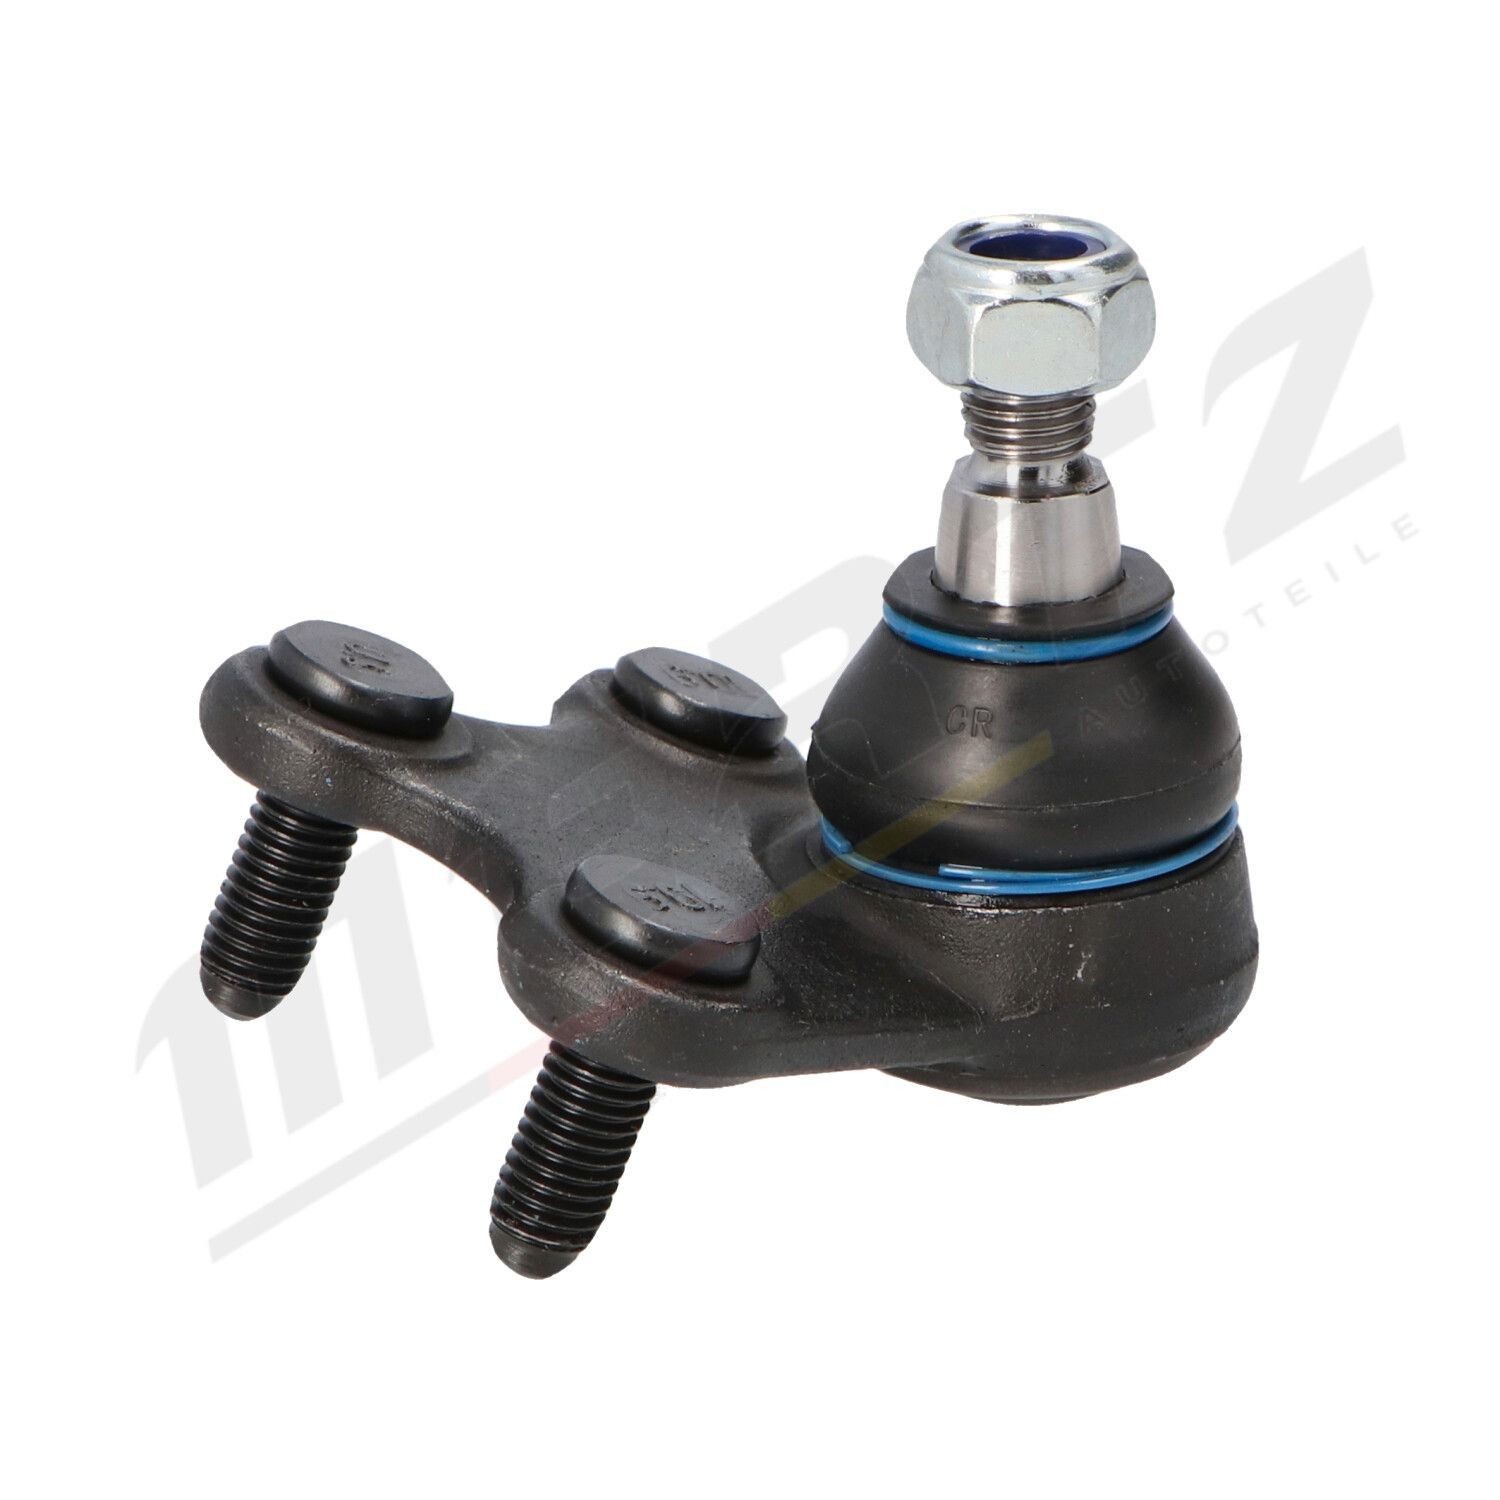 M-S0872 MERTZ Suspension ball joint SKODA Front Axle Right, with nut, with bolts/screws, 4,9mm, M12x1,5, M10x1,5mm